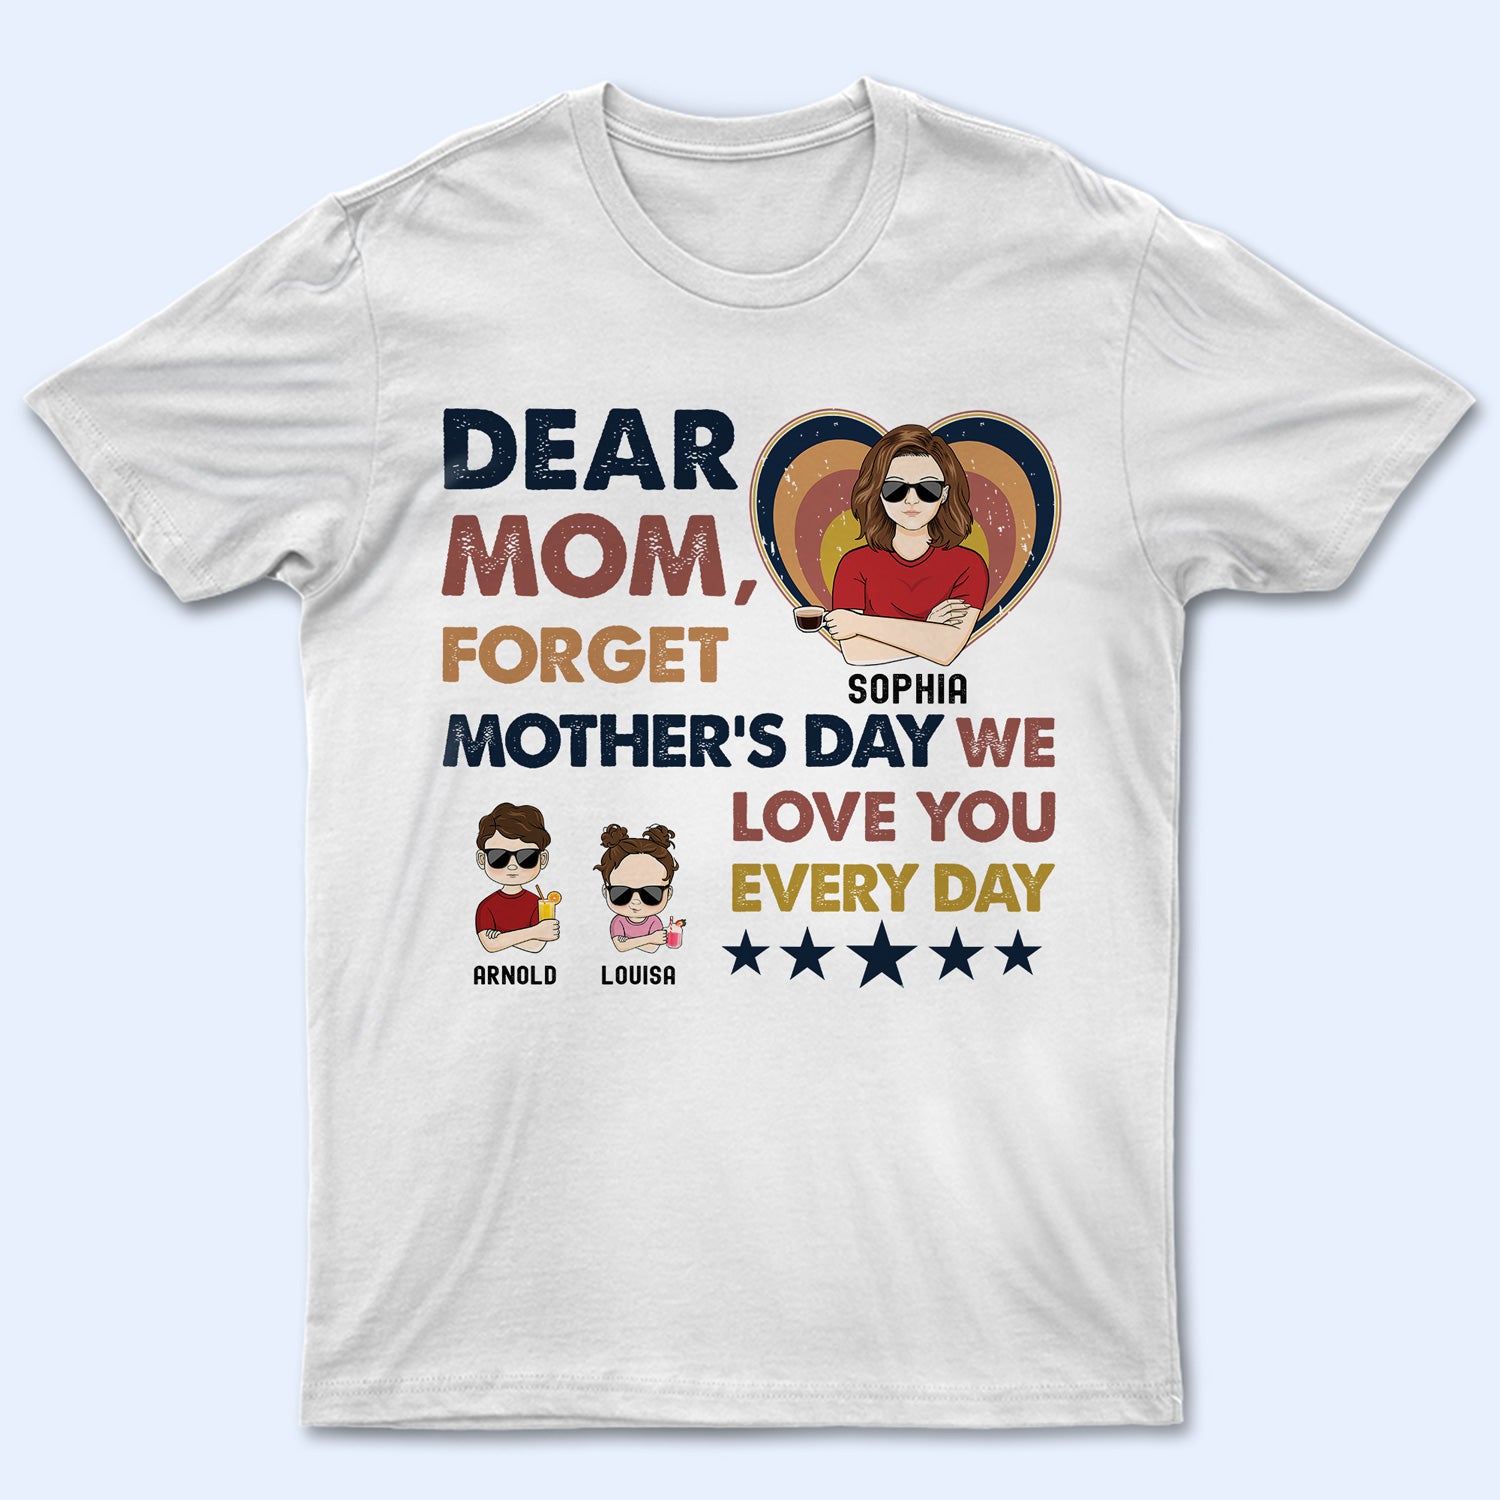 Dear Mom We Love You Every Day - Birthday, Loving Gift For Mother, Mama, Grandma, Grandmother - Personalized Custom T Shirt